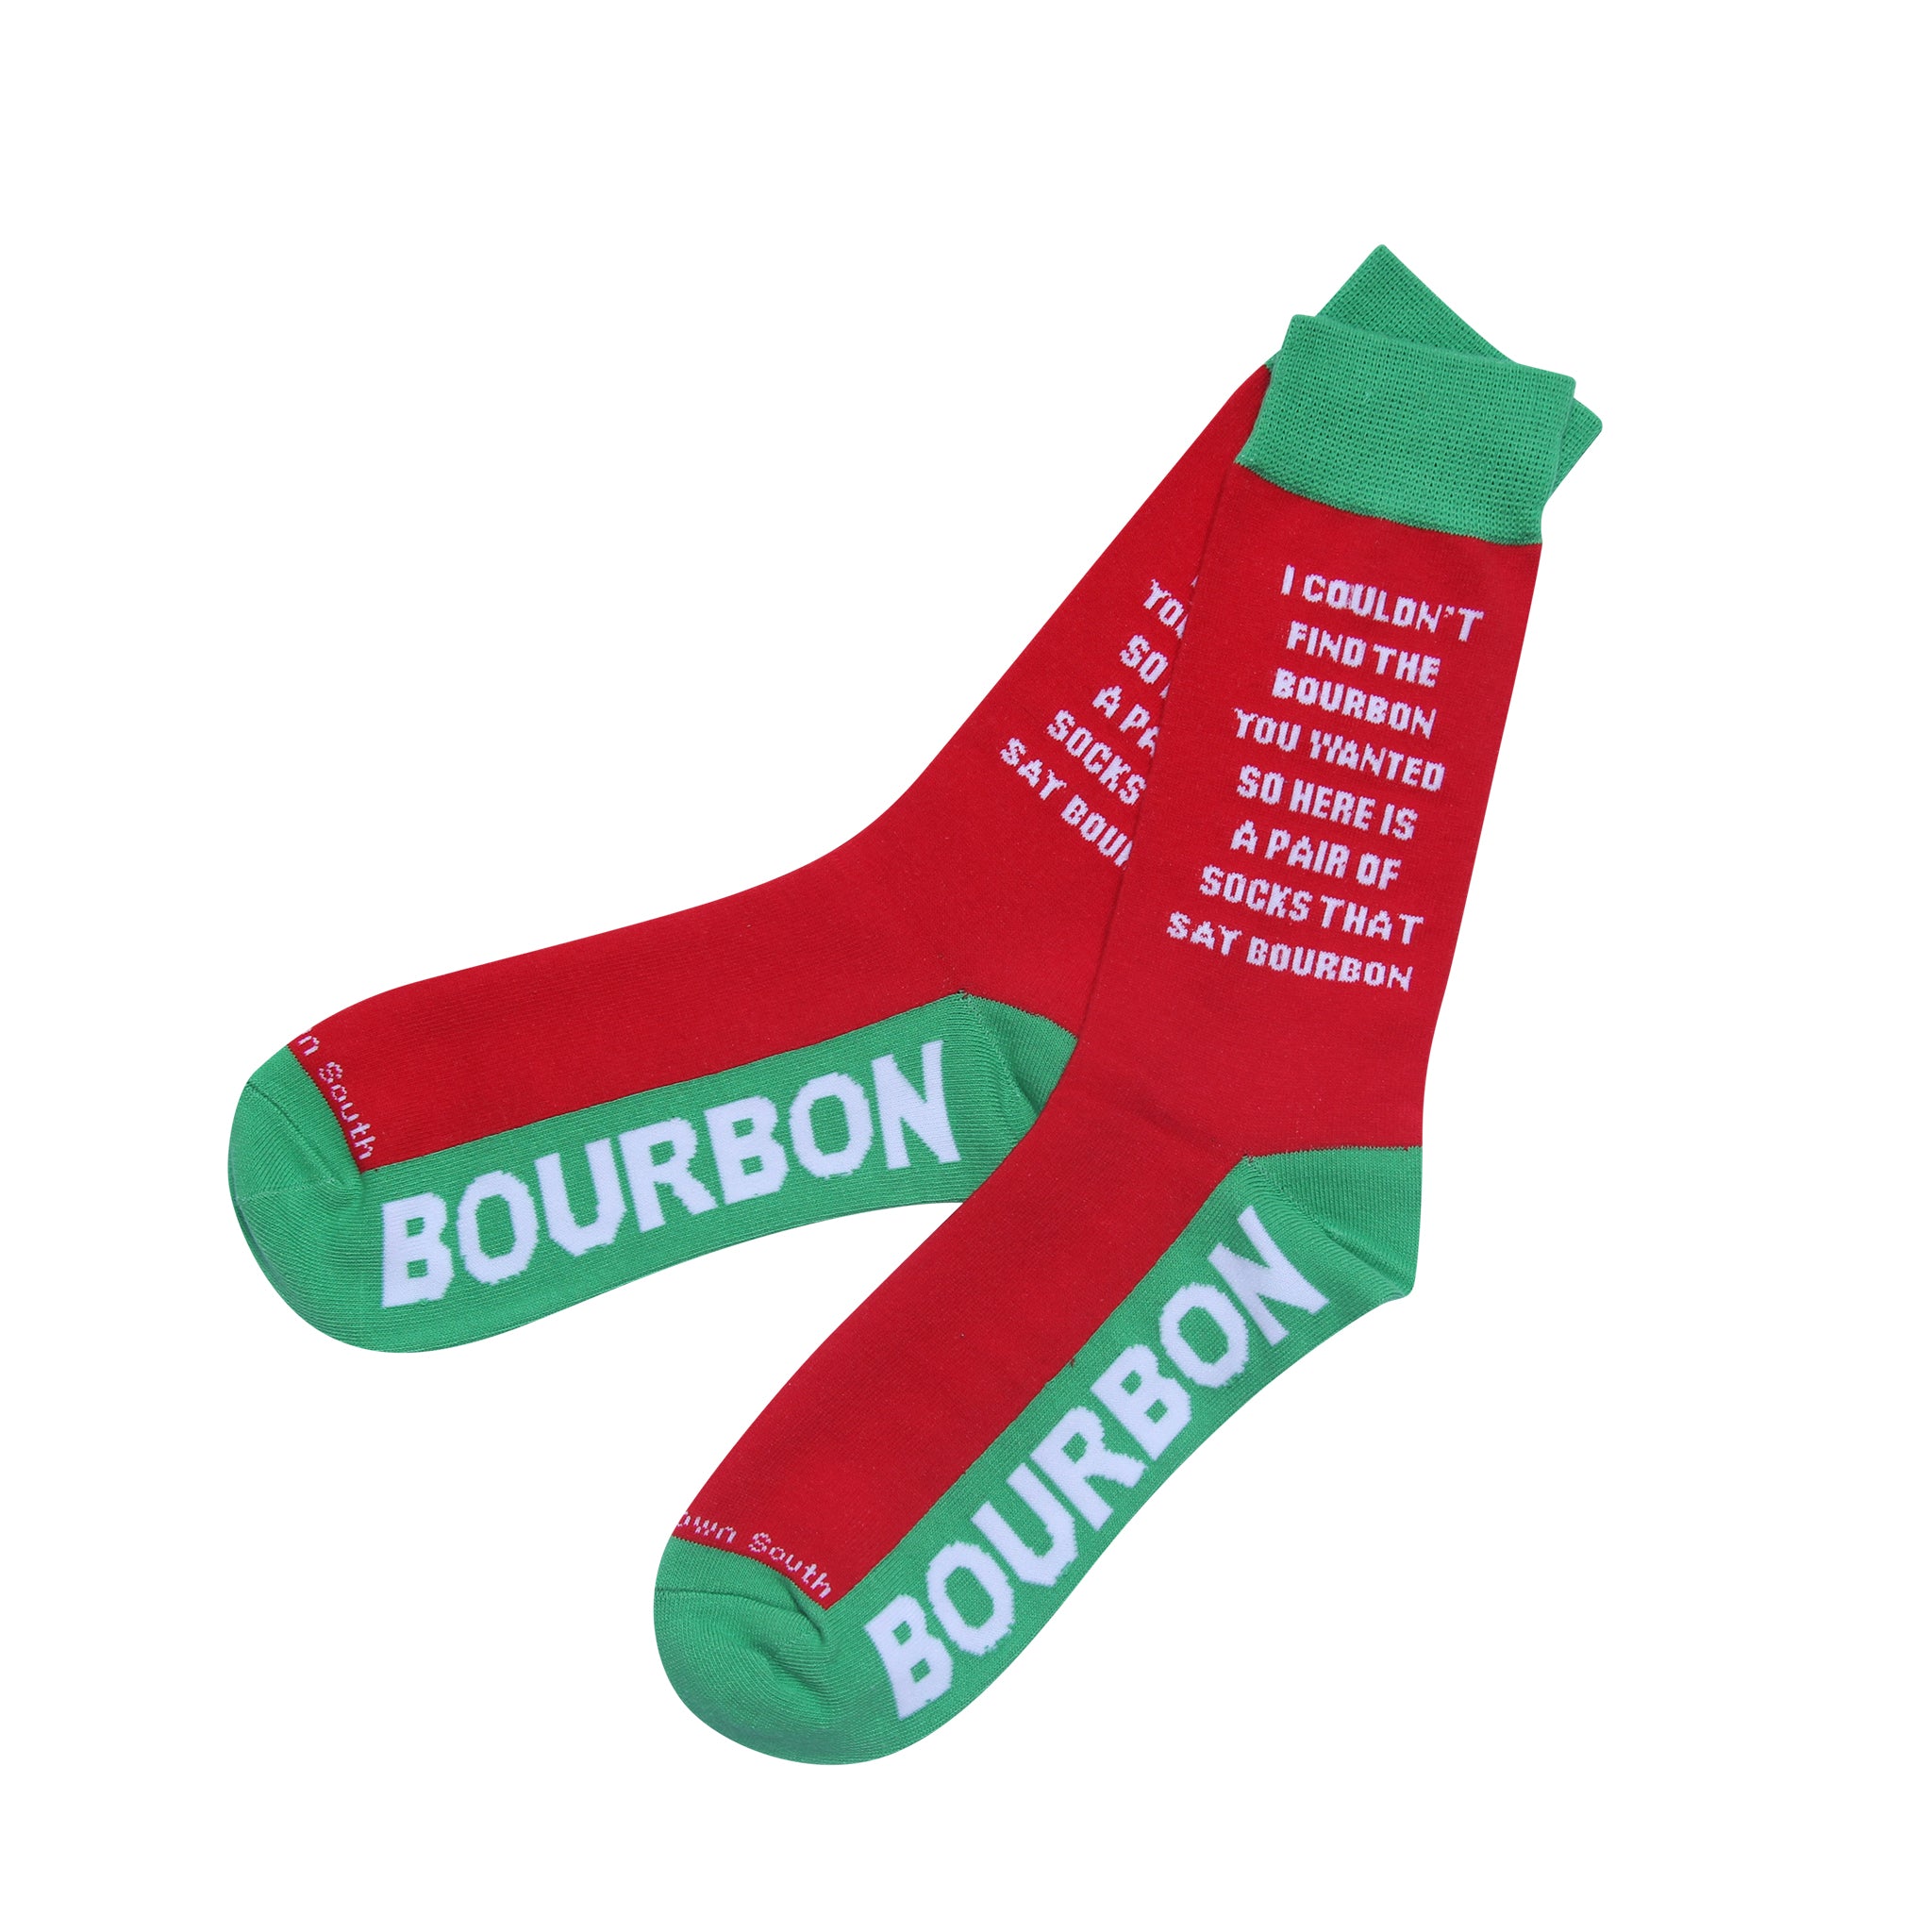 I Couldn't Find The Bourbon Socks